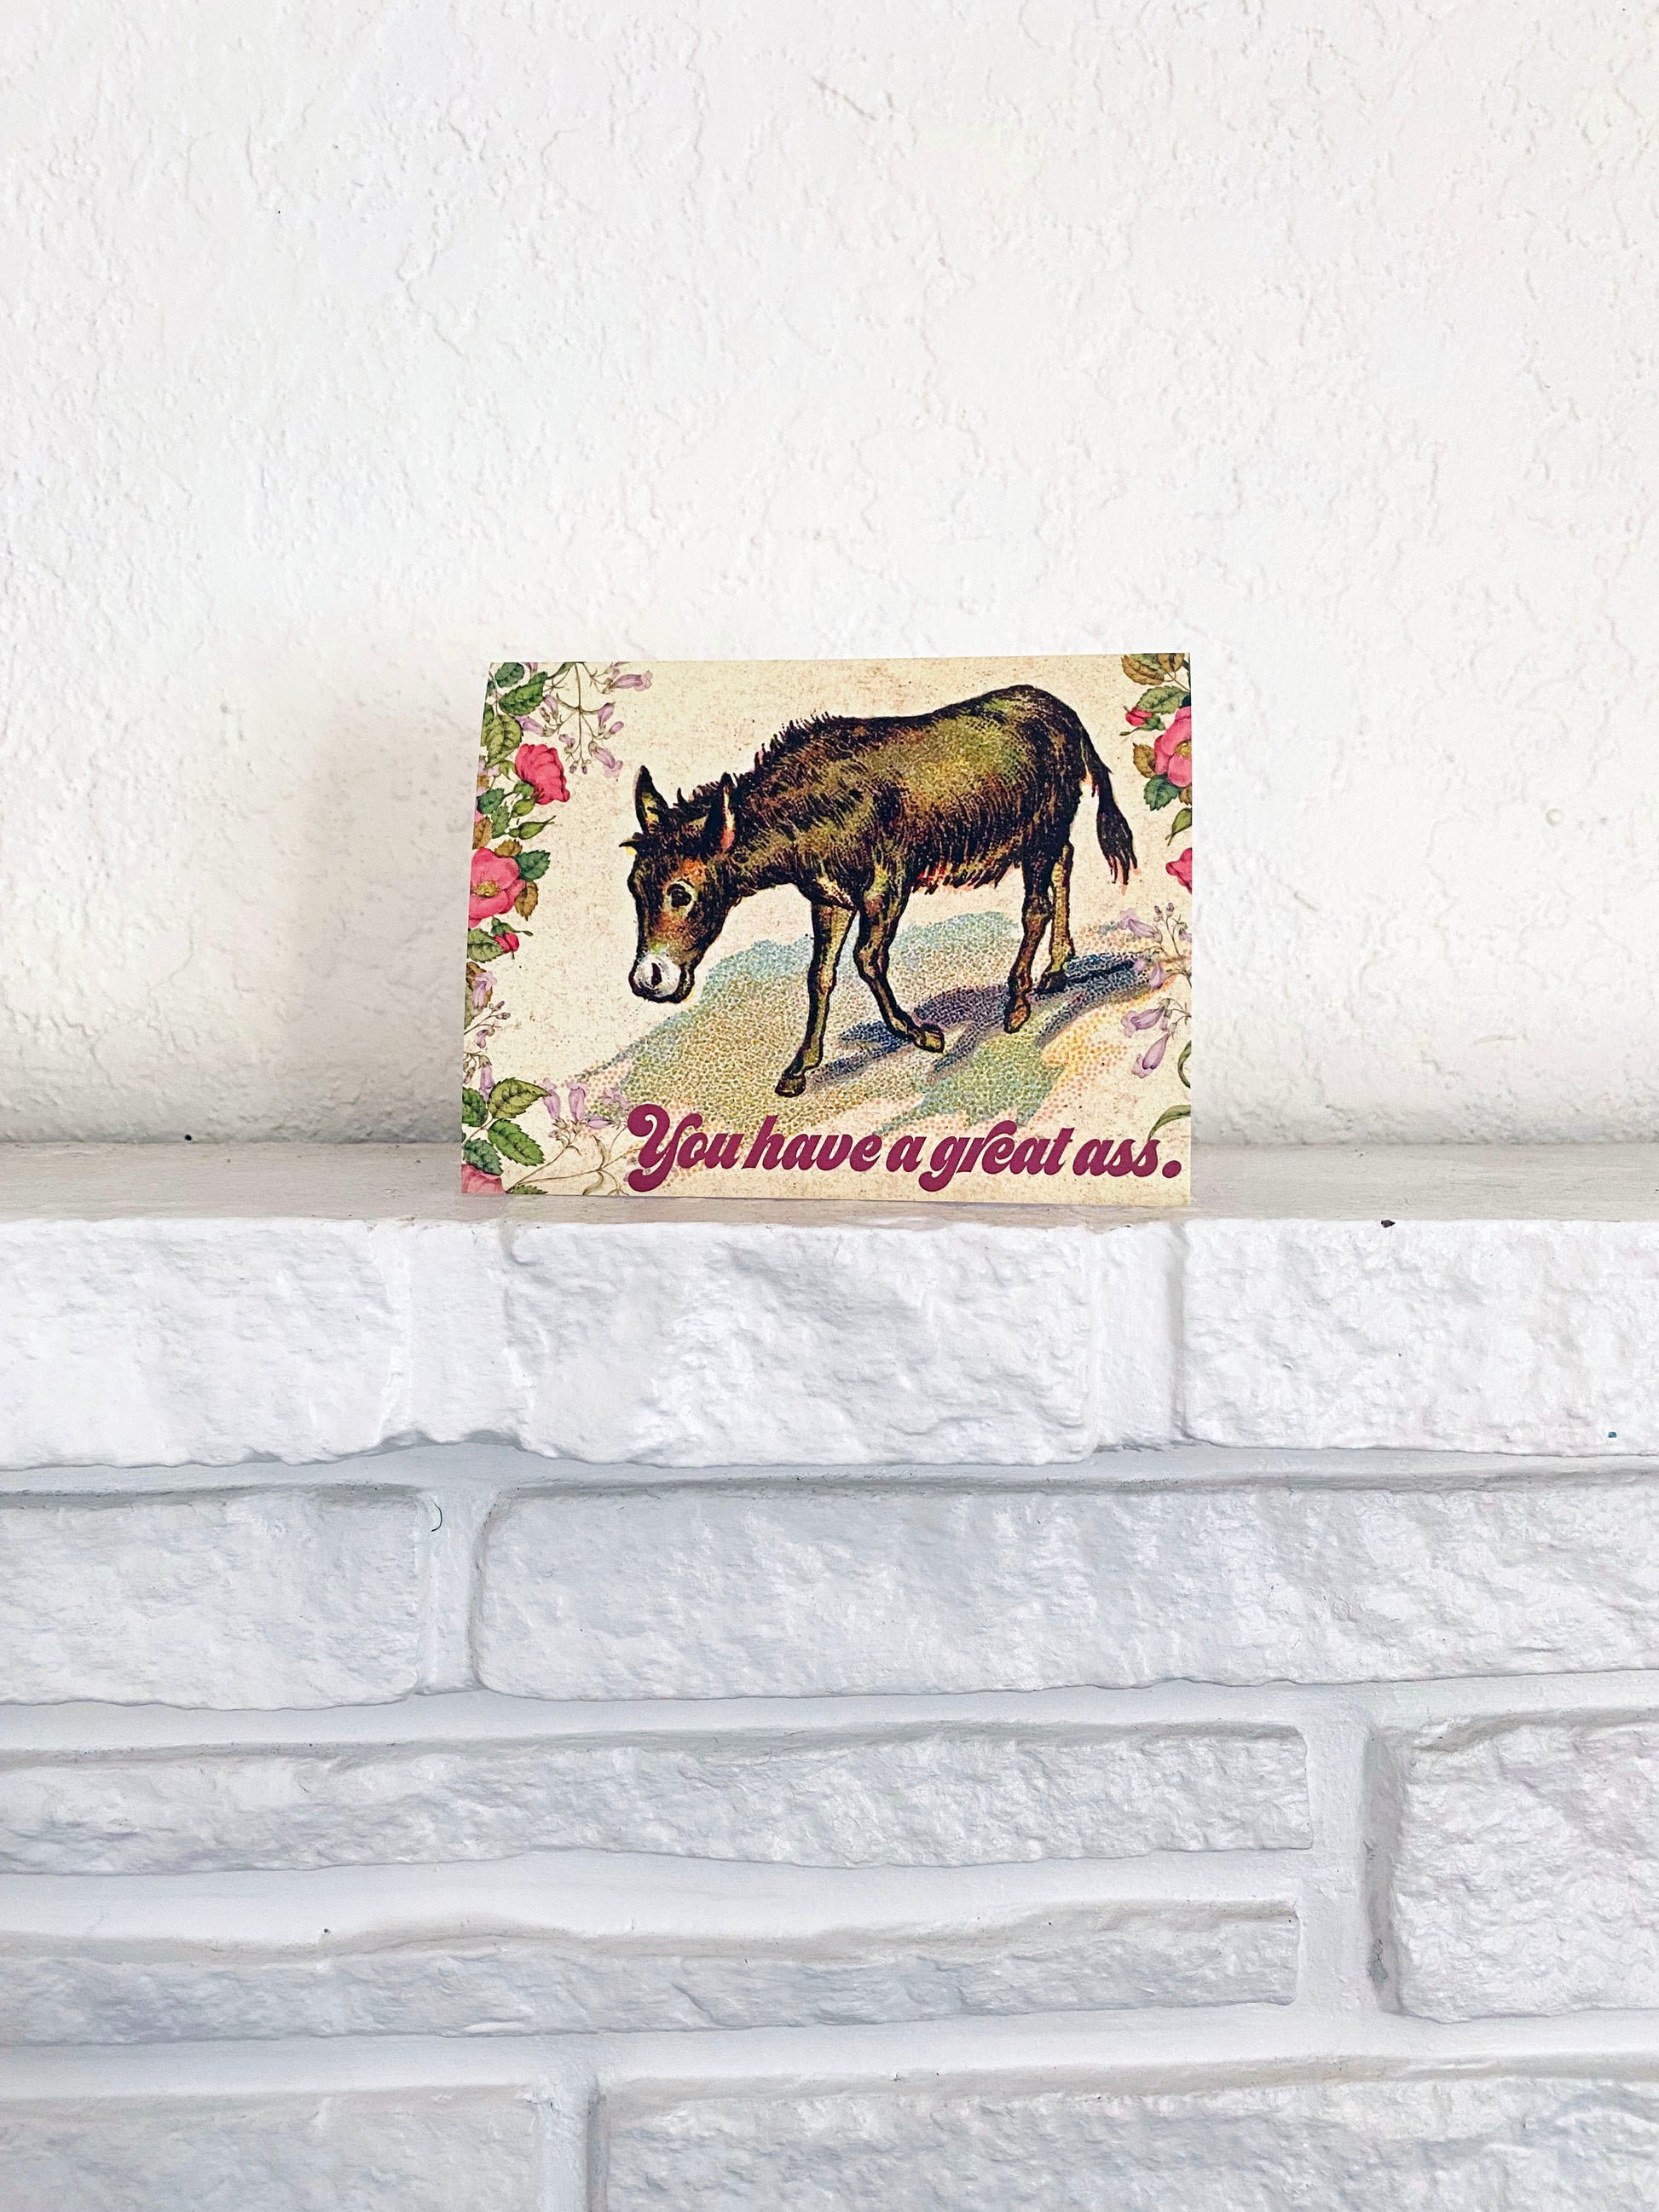 cute retro style greeting card coin laundry montana you have a great ass donkey card with flowers fun valentines day card funny sarcastic